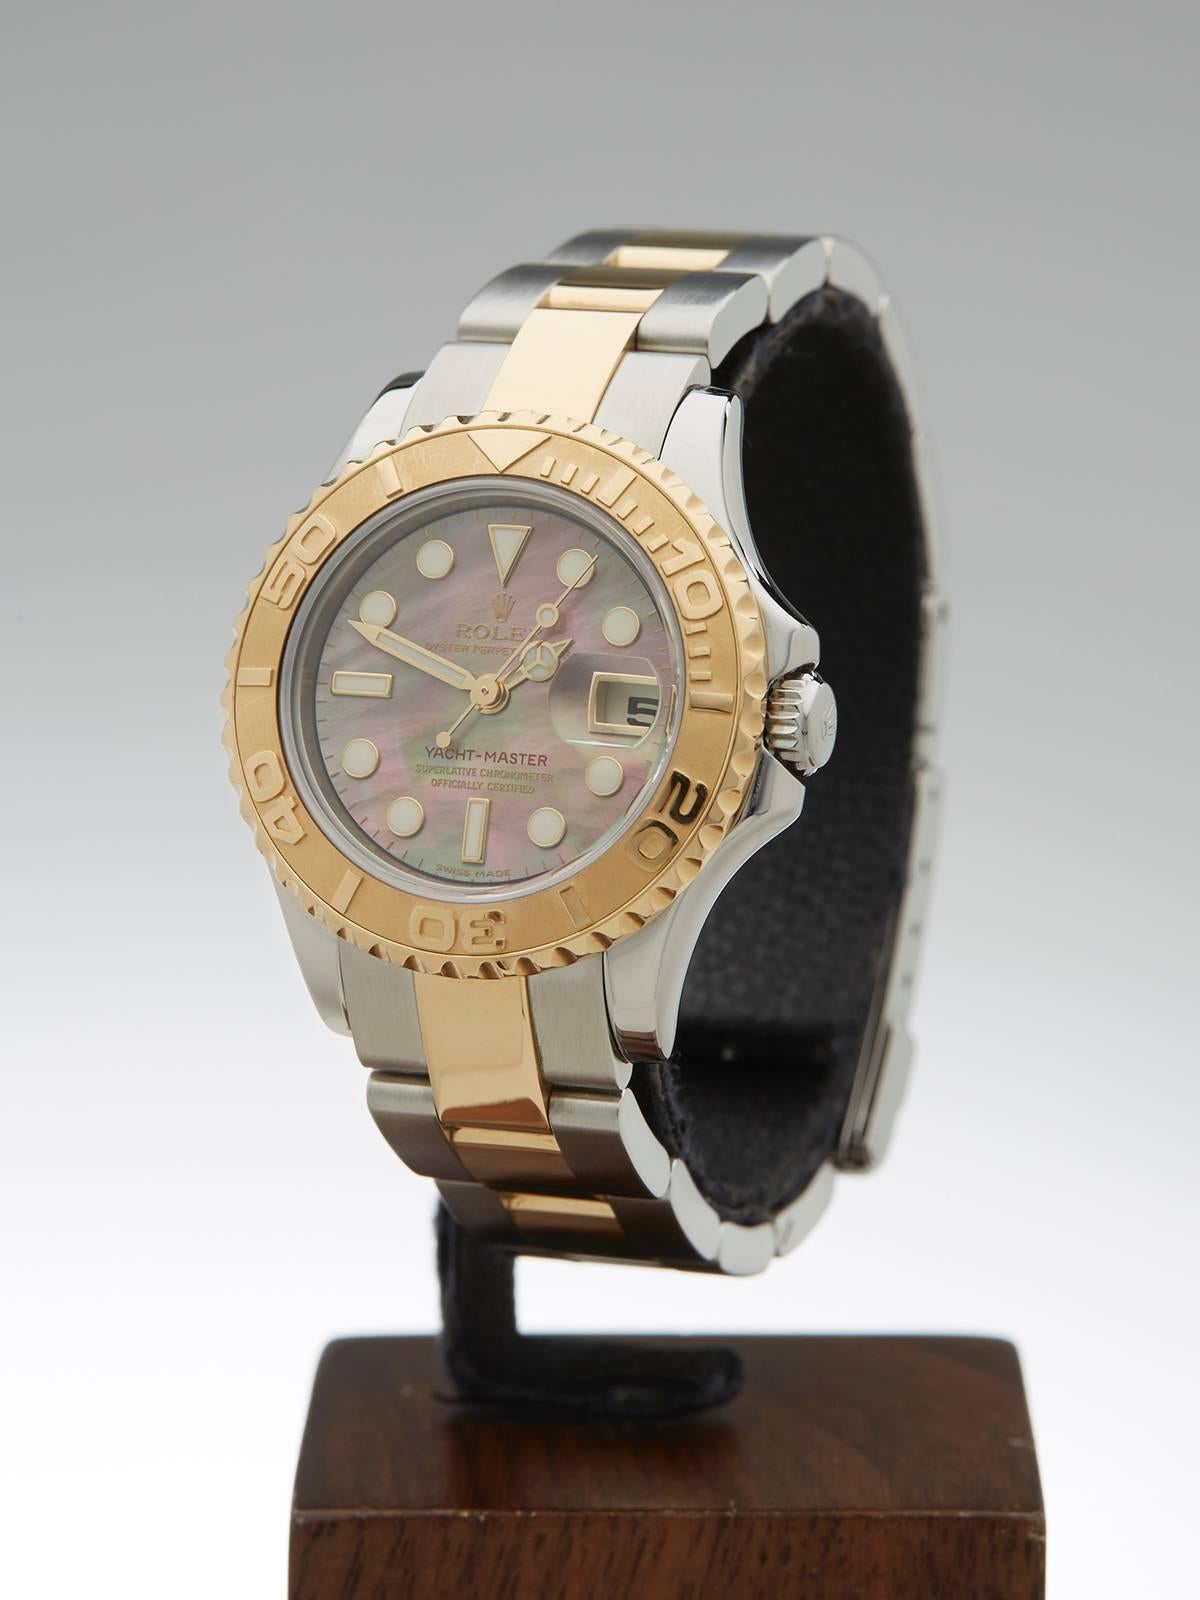 REF	W2825
MODEL NUMBER	169623
SERIAL NUMBER	V02****
CONDITION	9 - Excellent condition
GENDER	Ladies
AGE	4th June 2010
CASE DIAMETER	29 mm
CASE SIZE	29mm
BOX & PAPERS	Box, manuals & guarantee
MOVEMENT	Automatic
CASE	Stainless Steel/18k Yellow